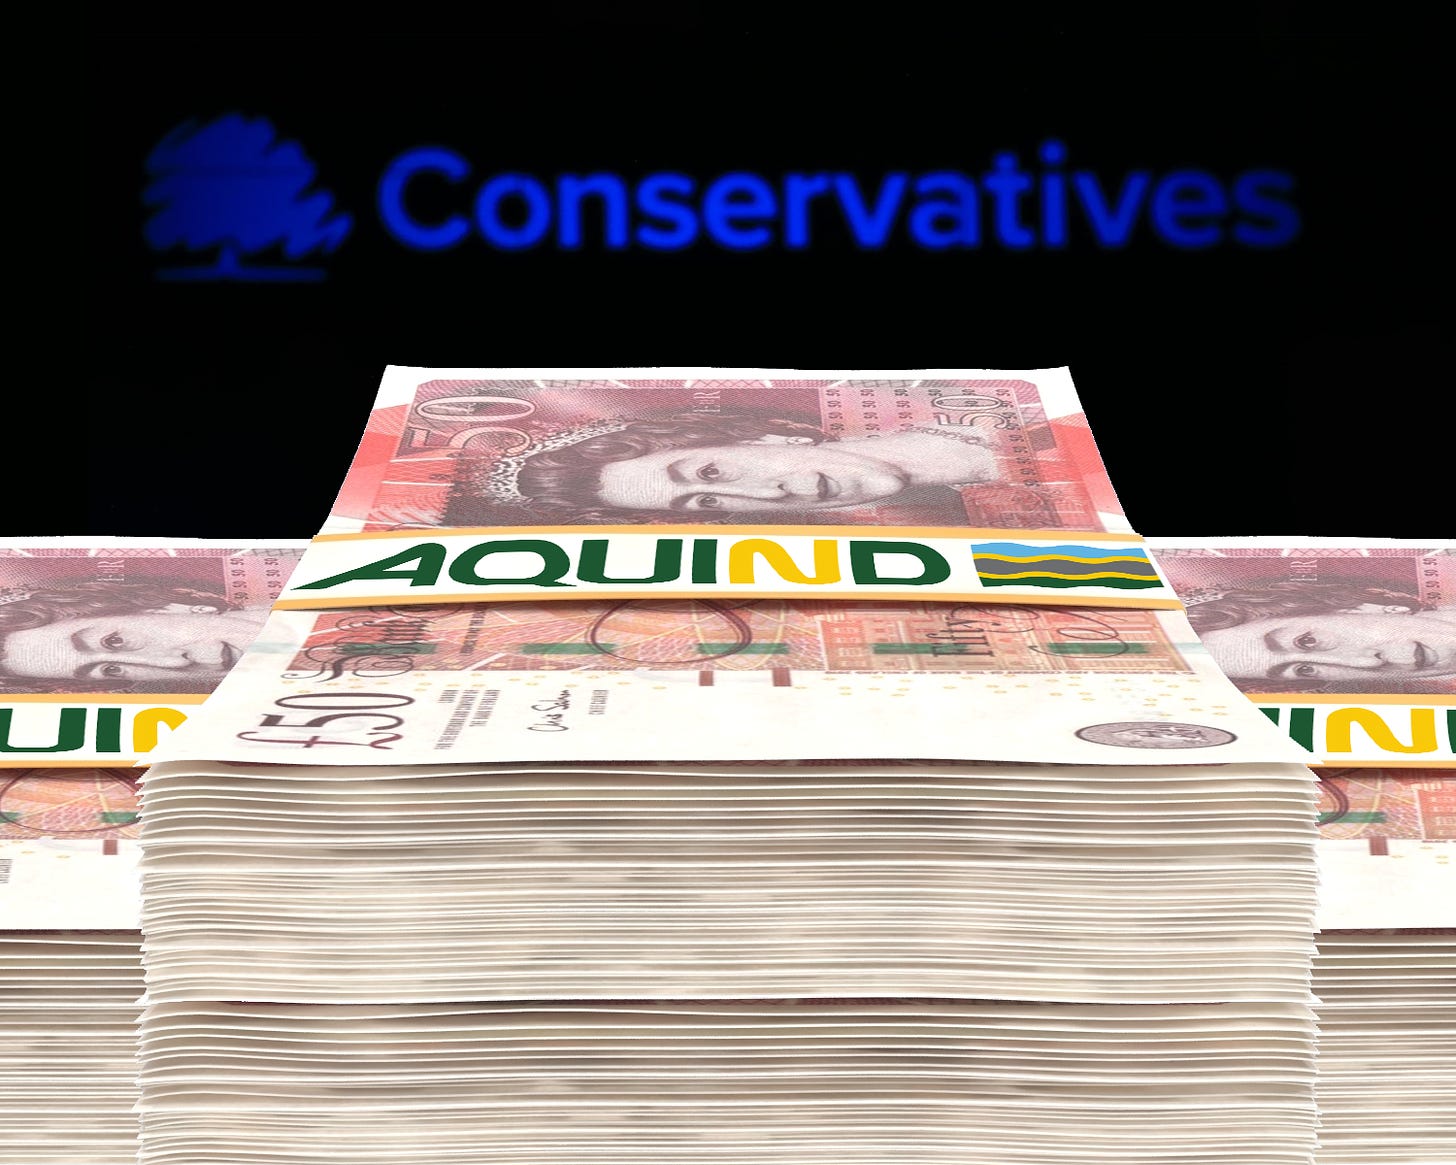 background: Conservative Party logo against a black backdrop; foreground: stacks upon stacks of £50 notes, with the Aquind logo across the paper bands holding each stack together